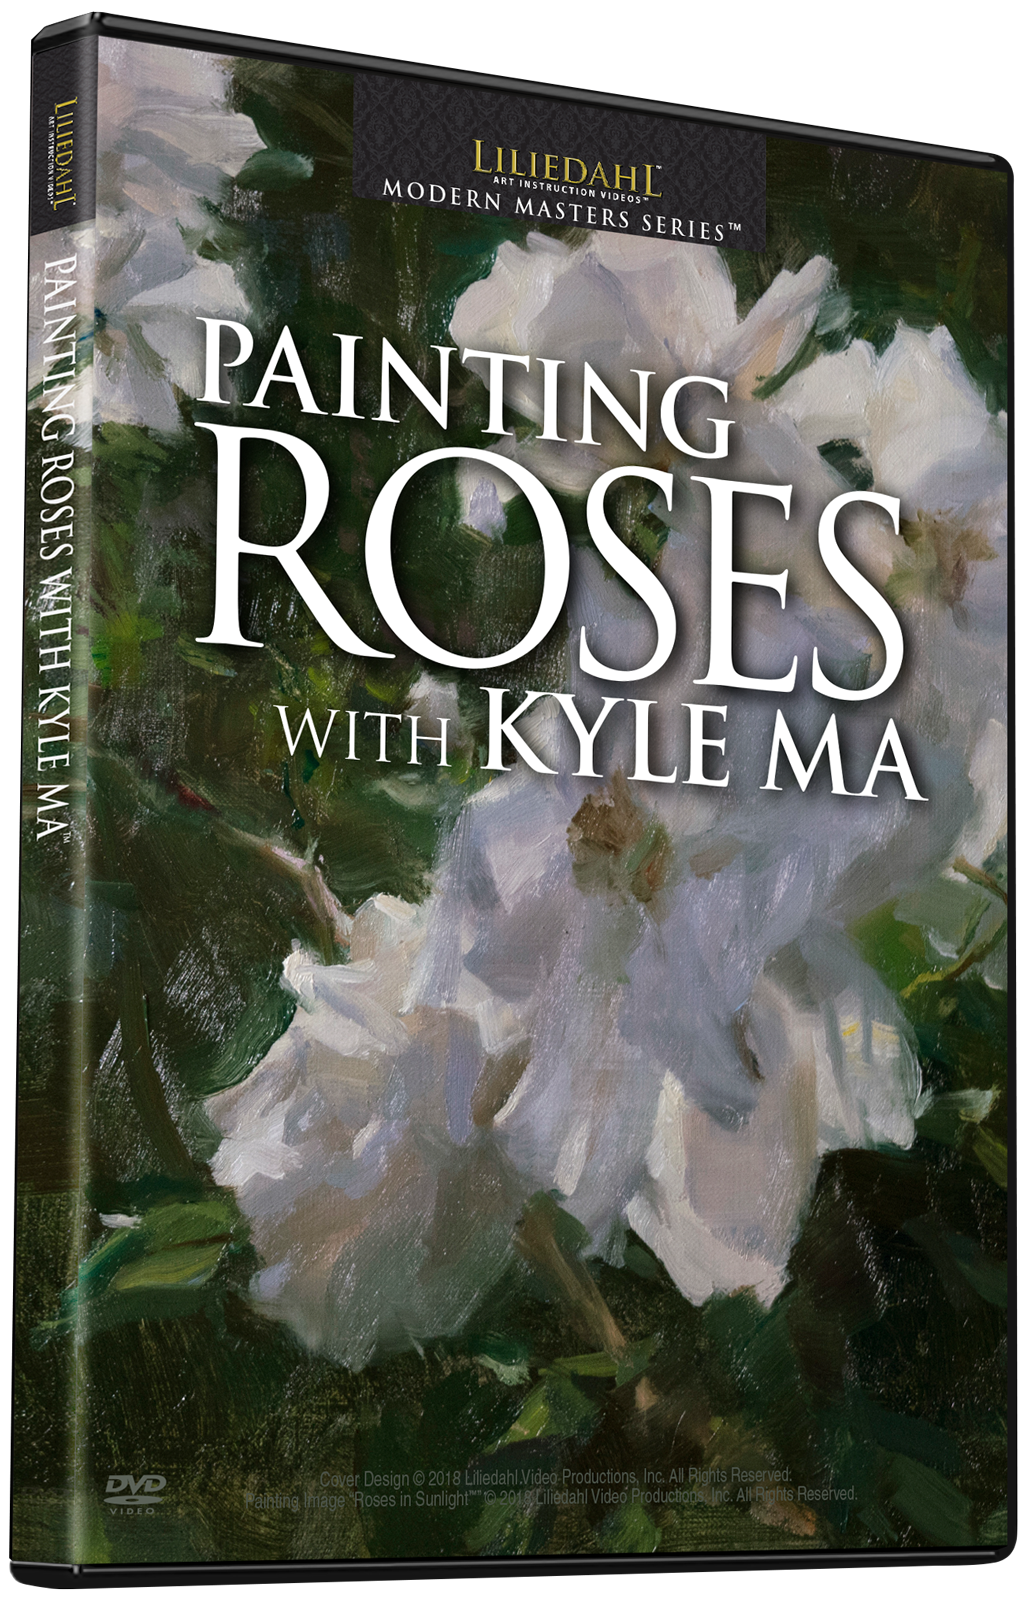 Kyle Ma: Painting Roses